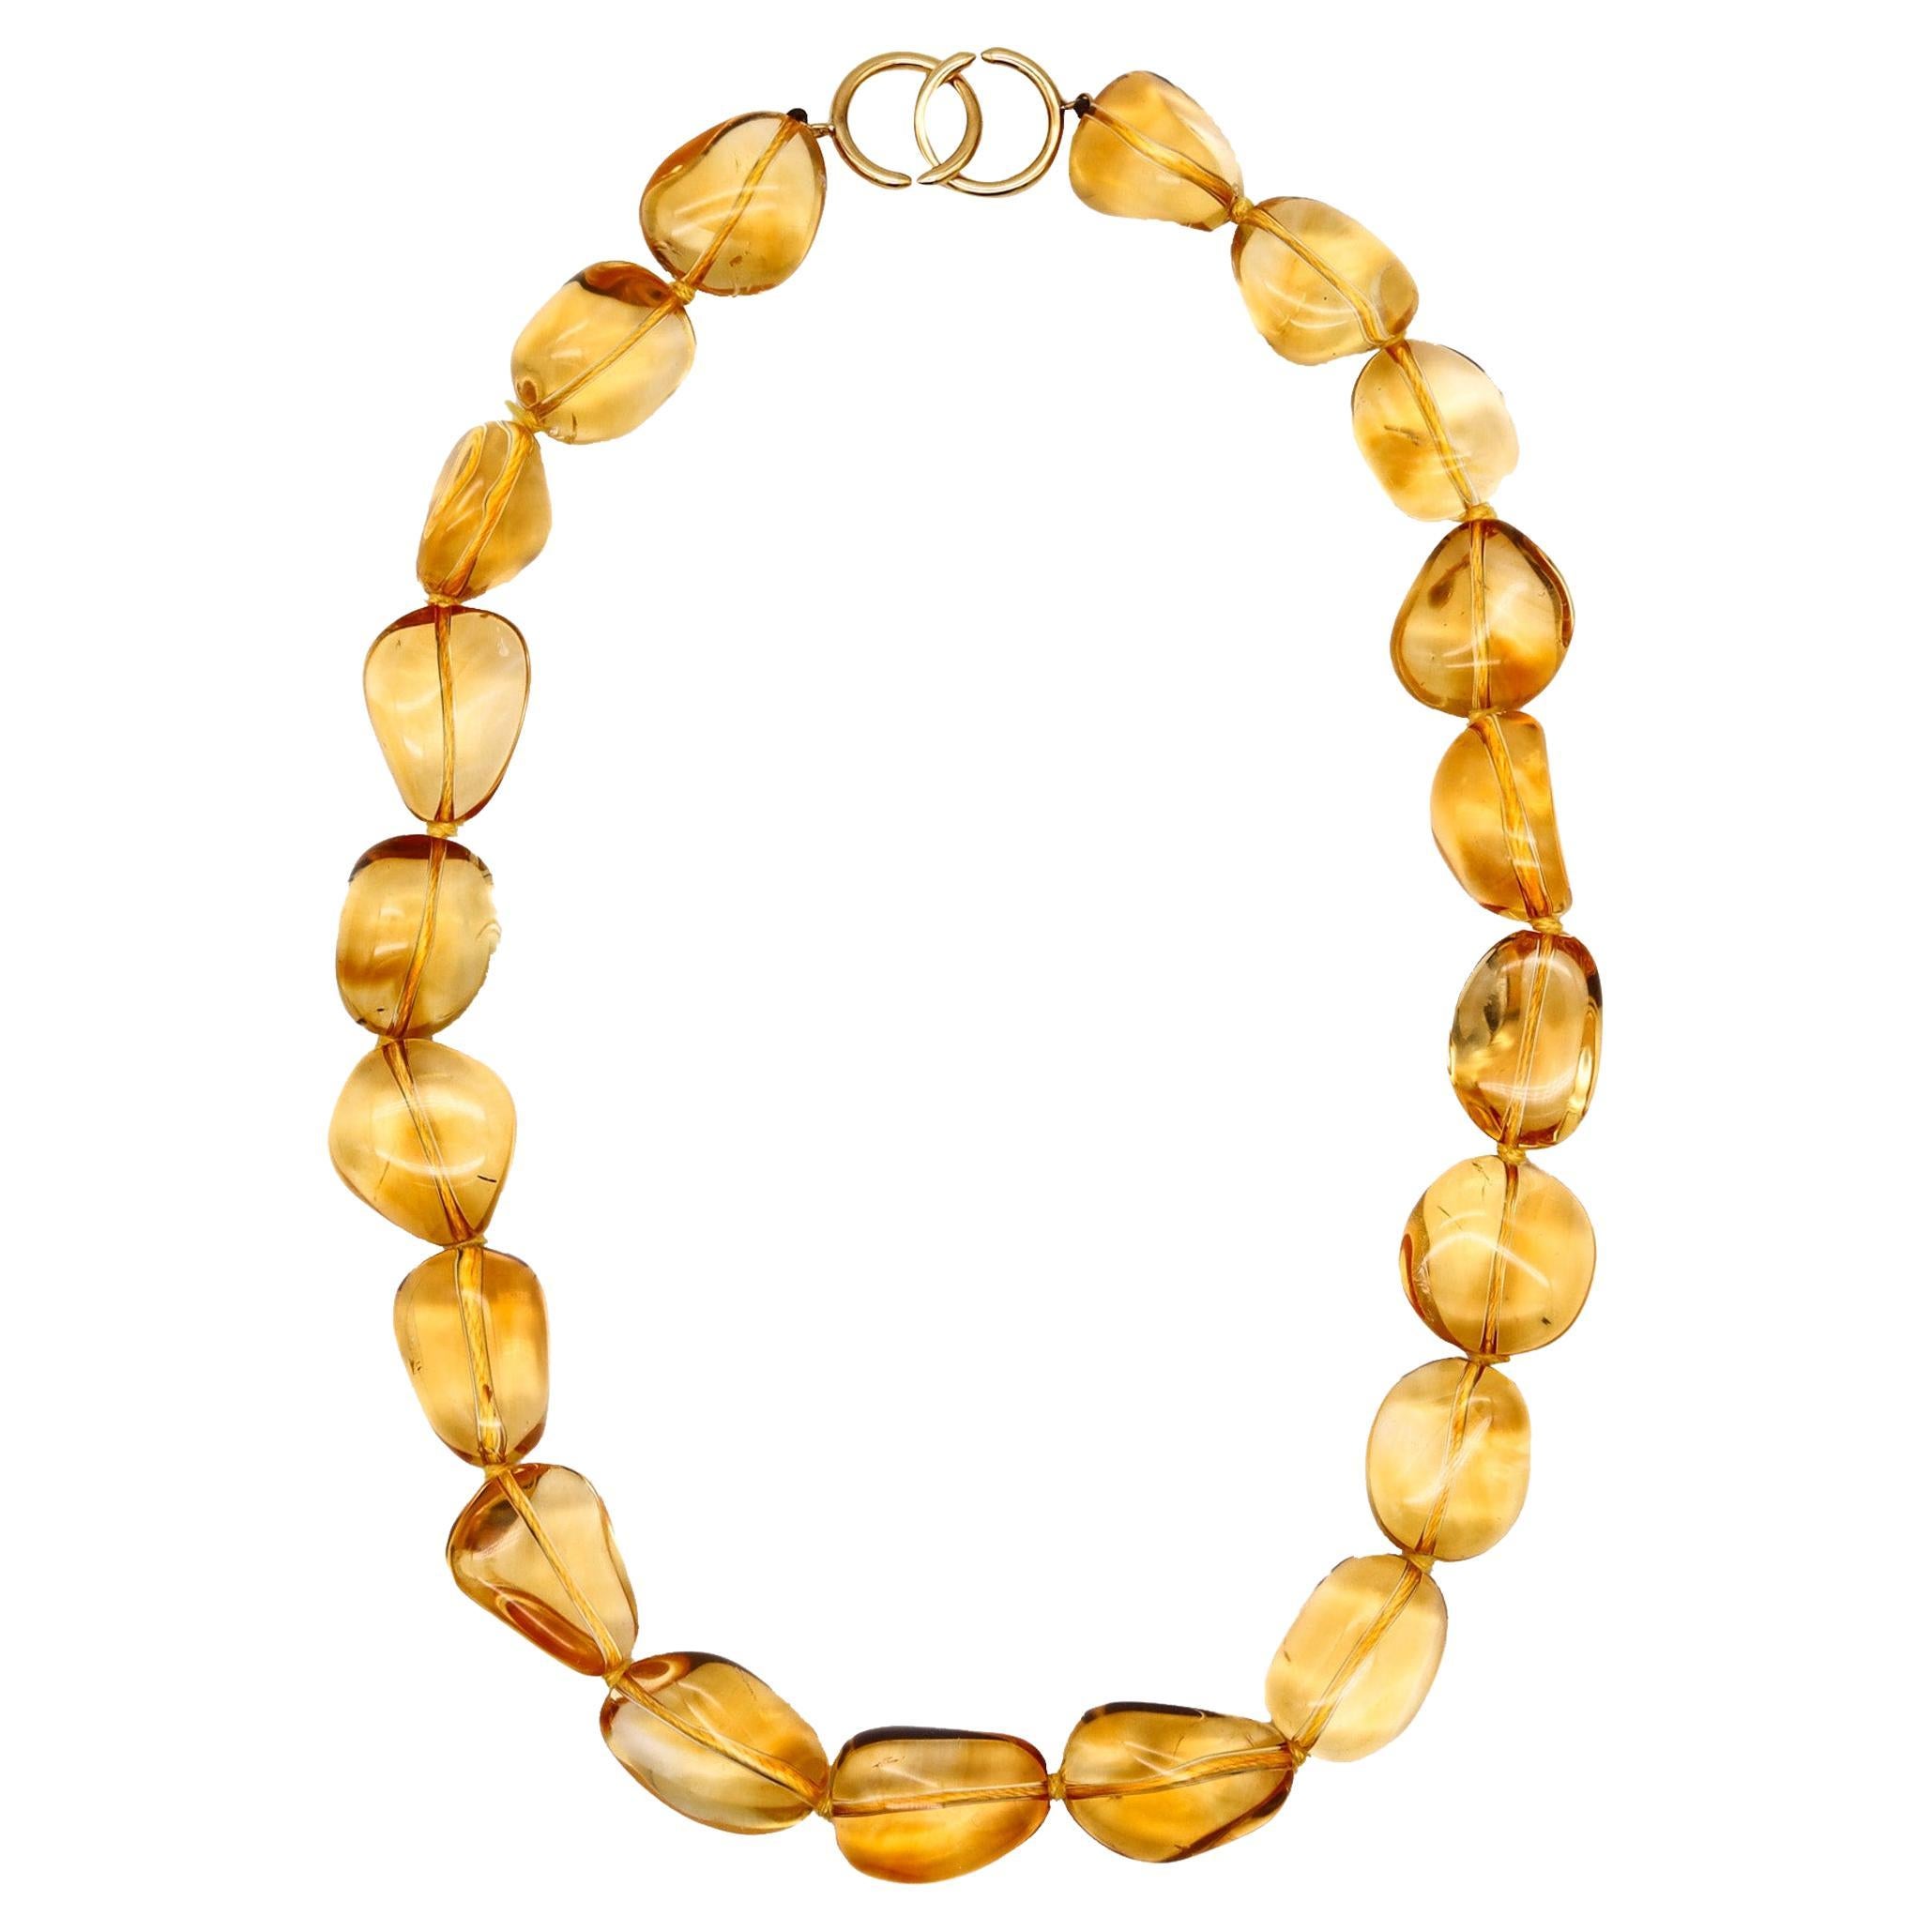 Tiffany & Co. by Paloma Picasso Necklace in 18 Karat Gold with 500ctw Citrines For Sale